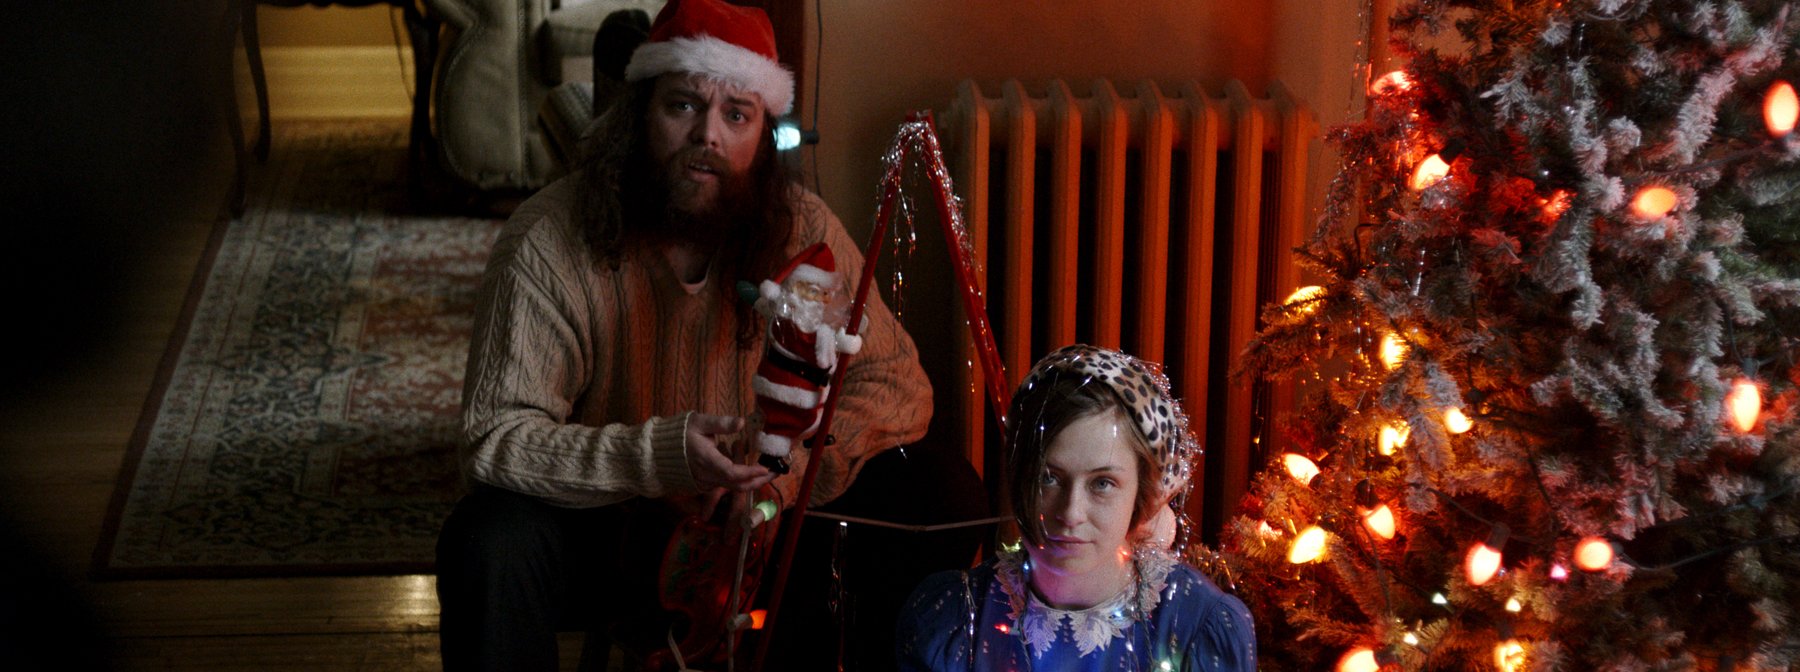 Yuletide Frights - A compendium of Crazy Christmas Horror